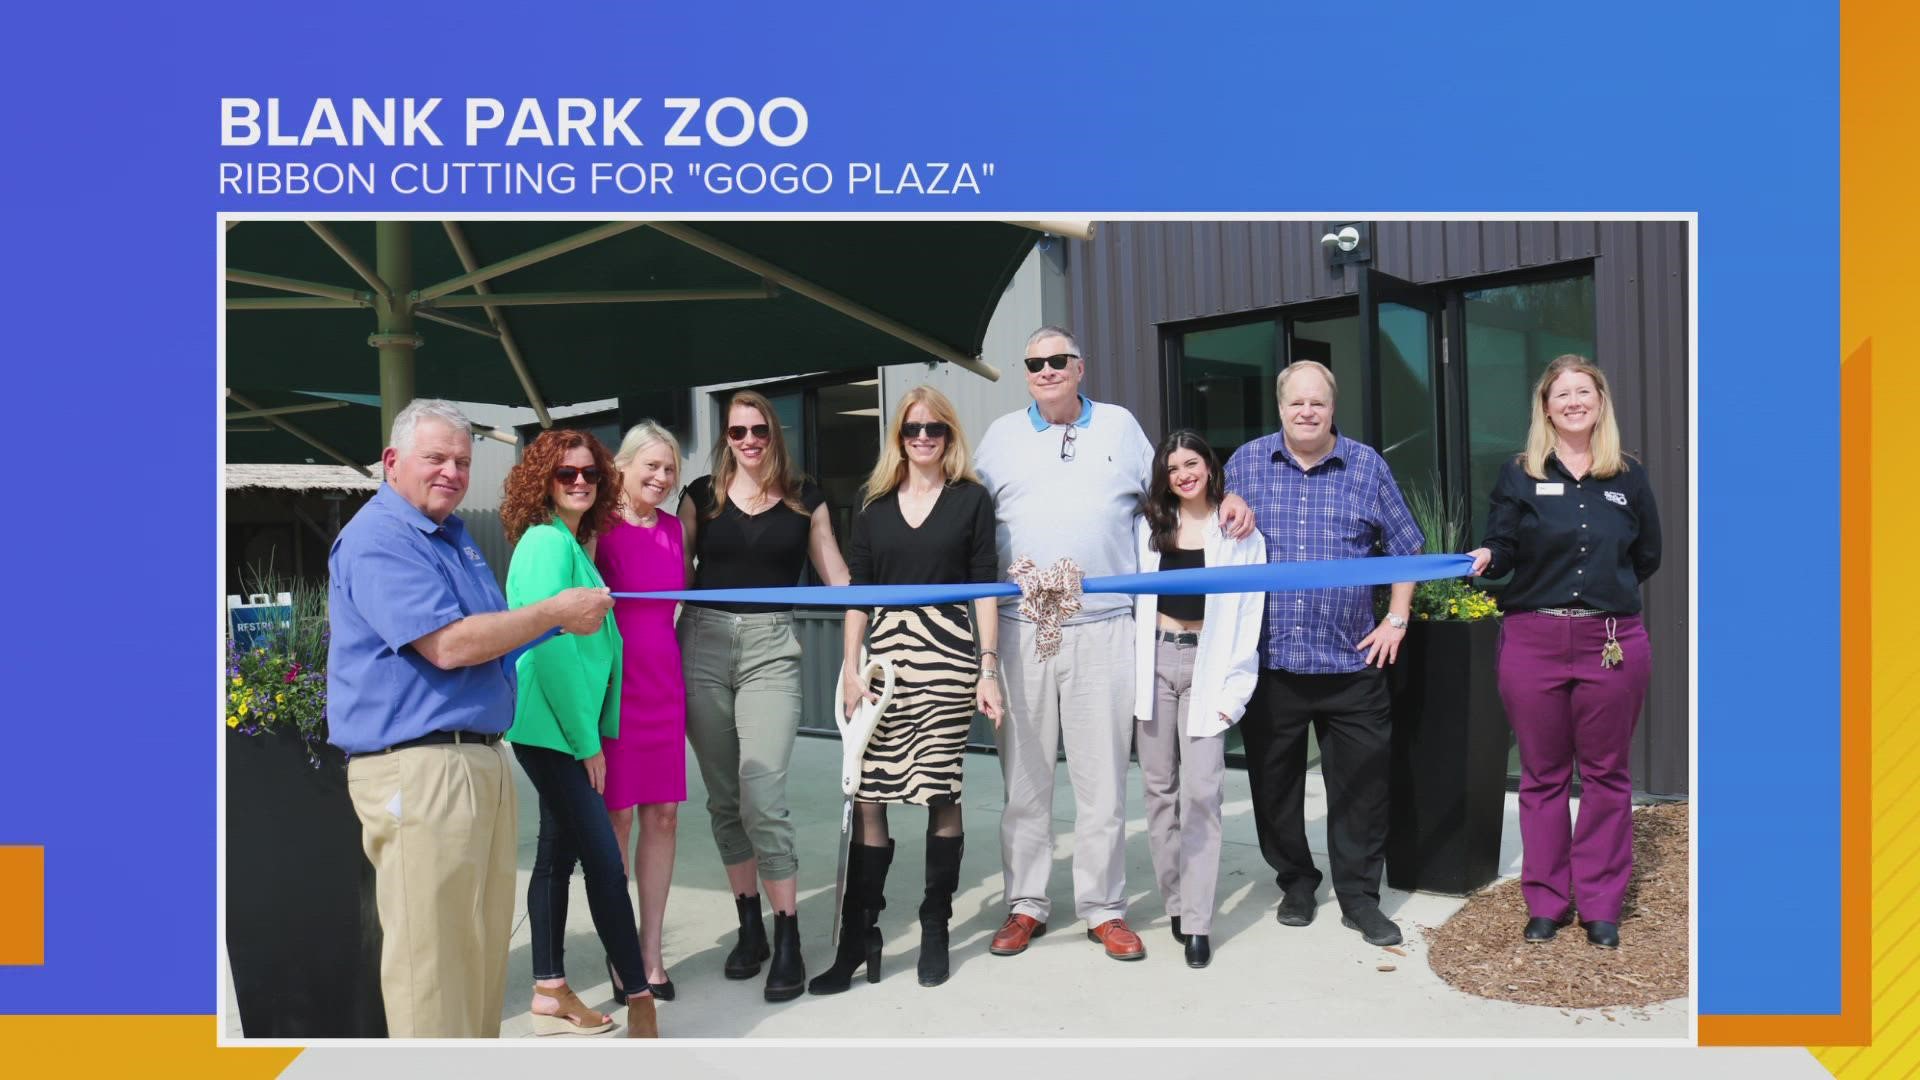 Julia Bingham introduces us to their newest Ambassador animal, Ima, the Hognosed Snake and shows us the newest space, GoGo Plaza, at the Blank Park Zoo!